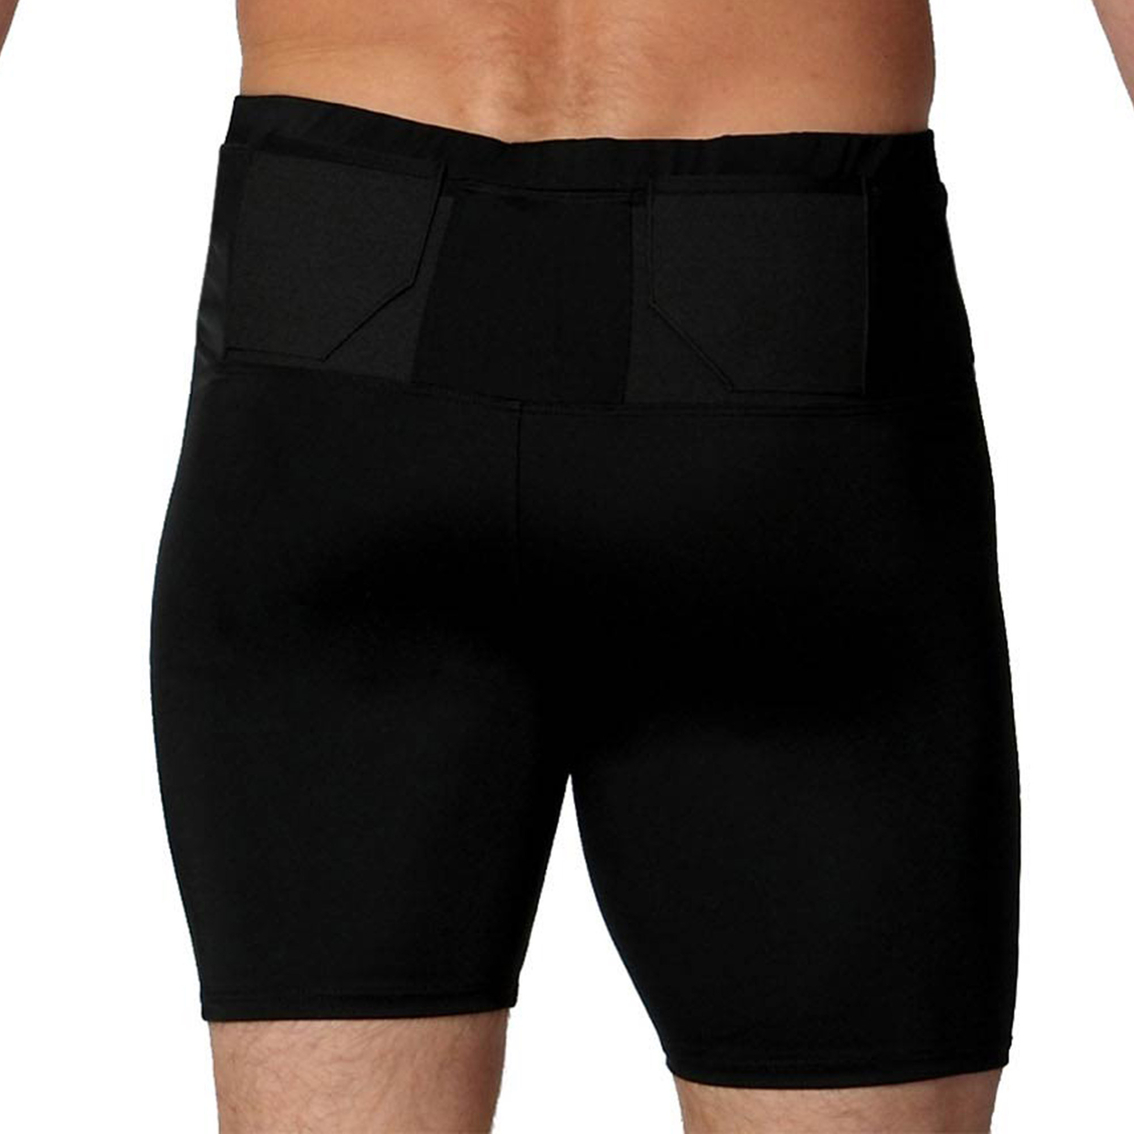 I.s.pro Tactical Concealed Carry Undershorts | Holsters & Slings ...